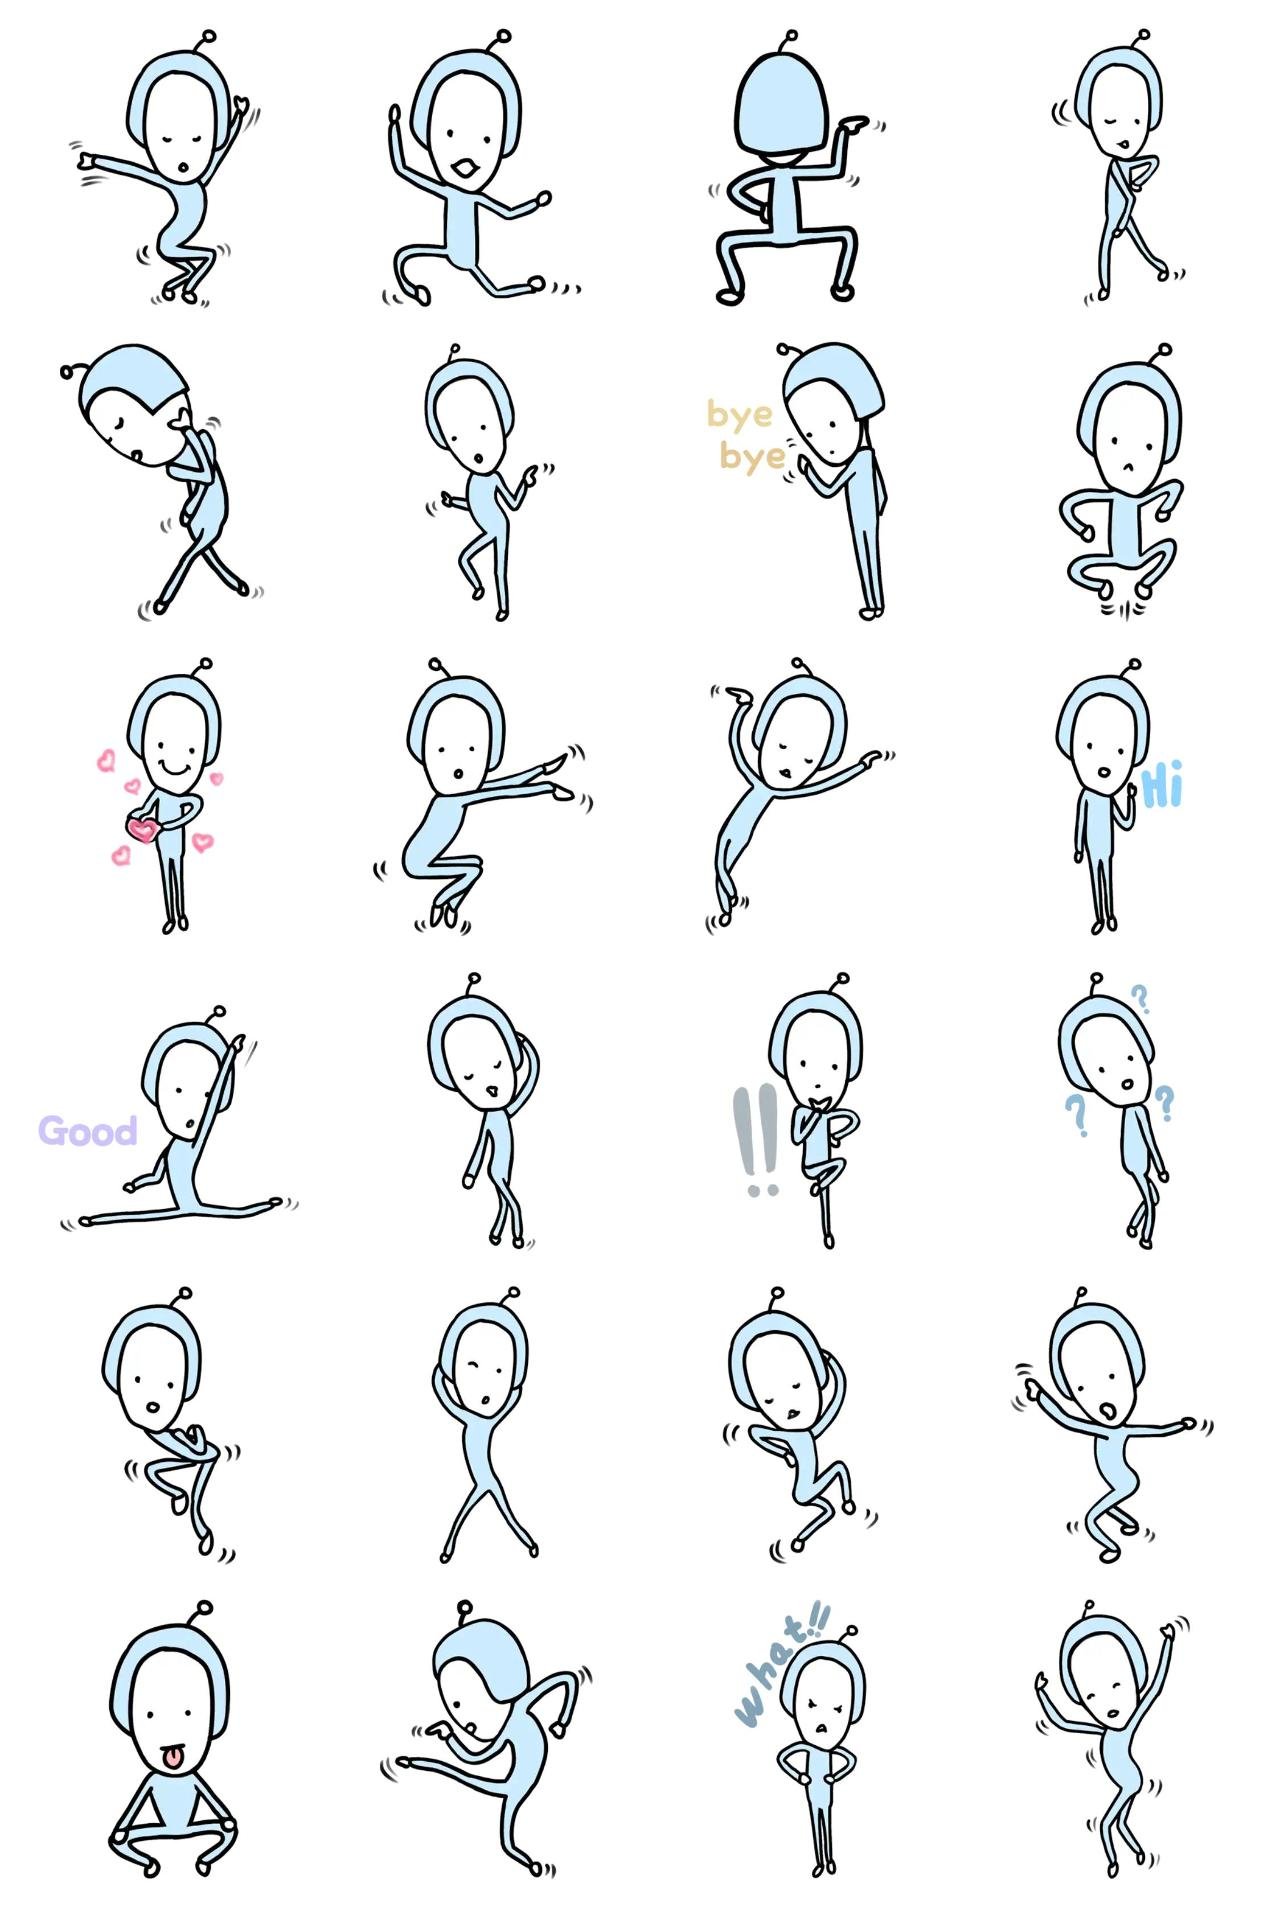 Happy alien Lulu Etc. sticker pack for Whatsapp, Telegram, Signal, and others chatting and message apps